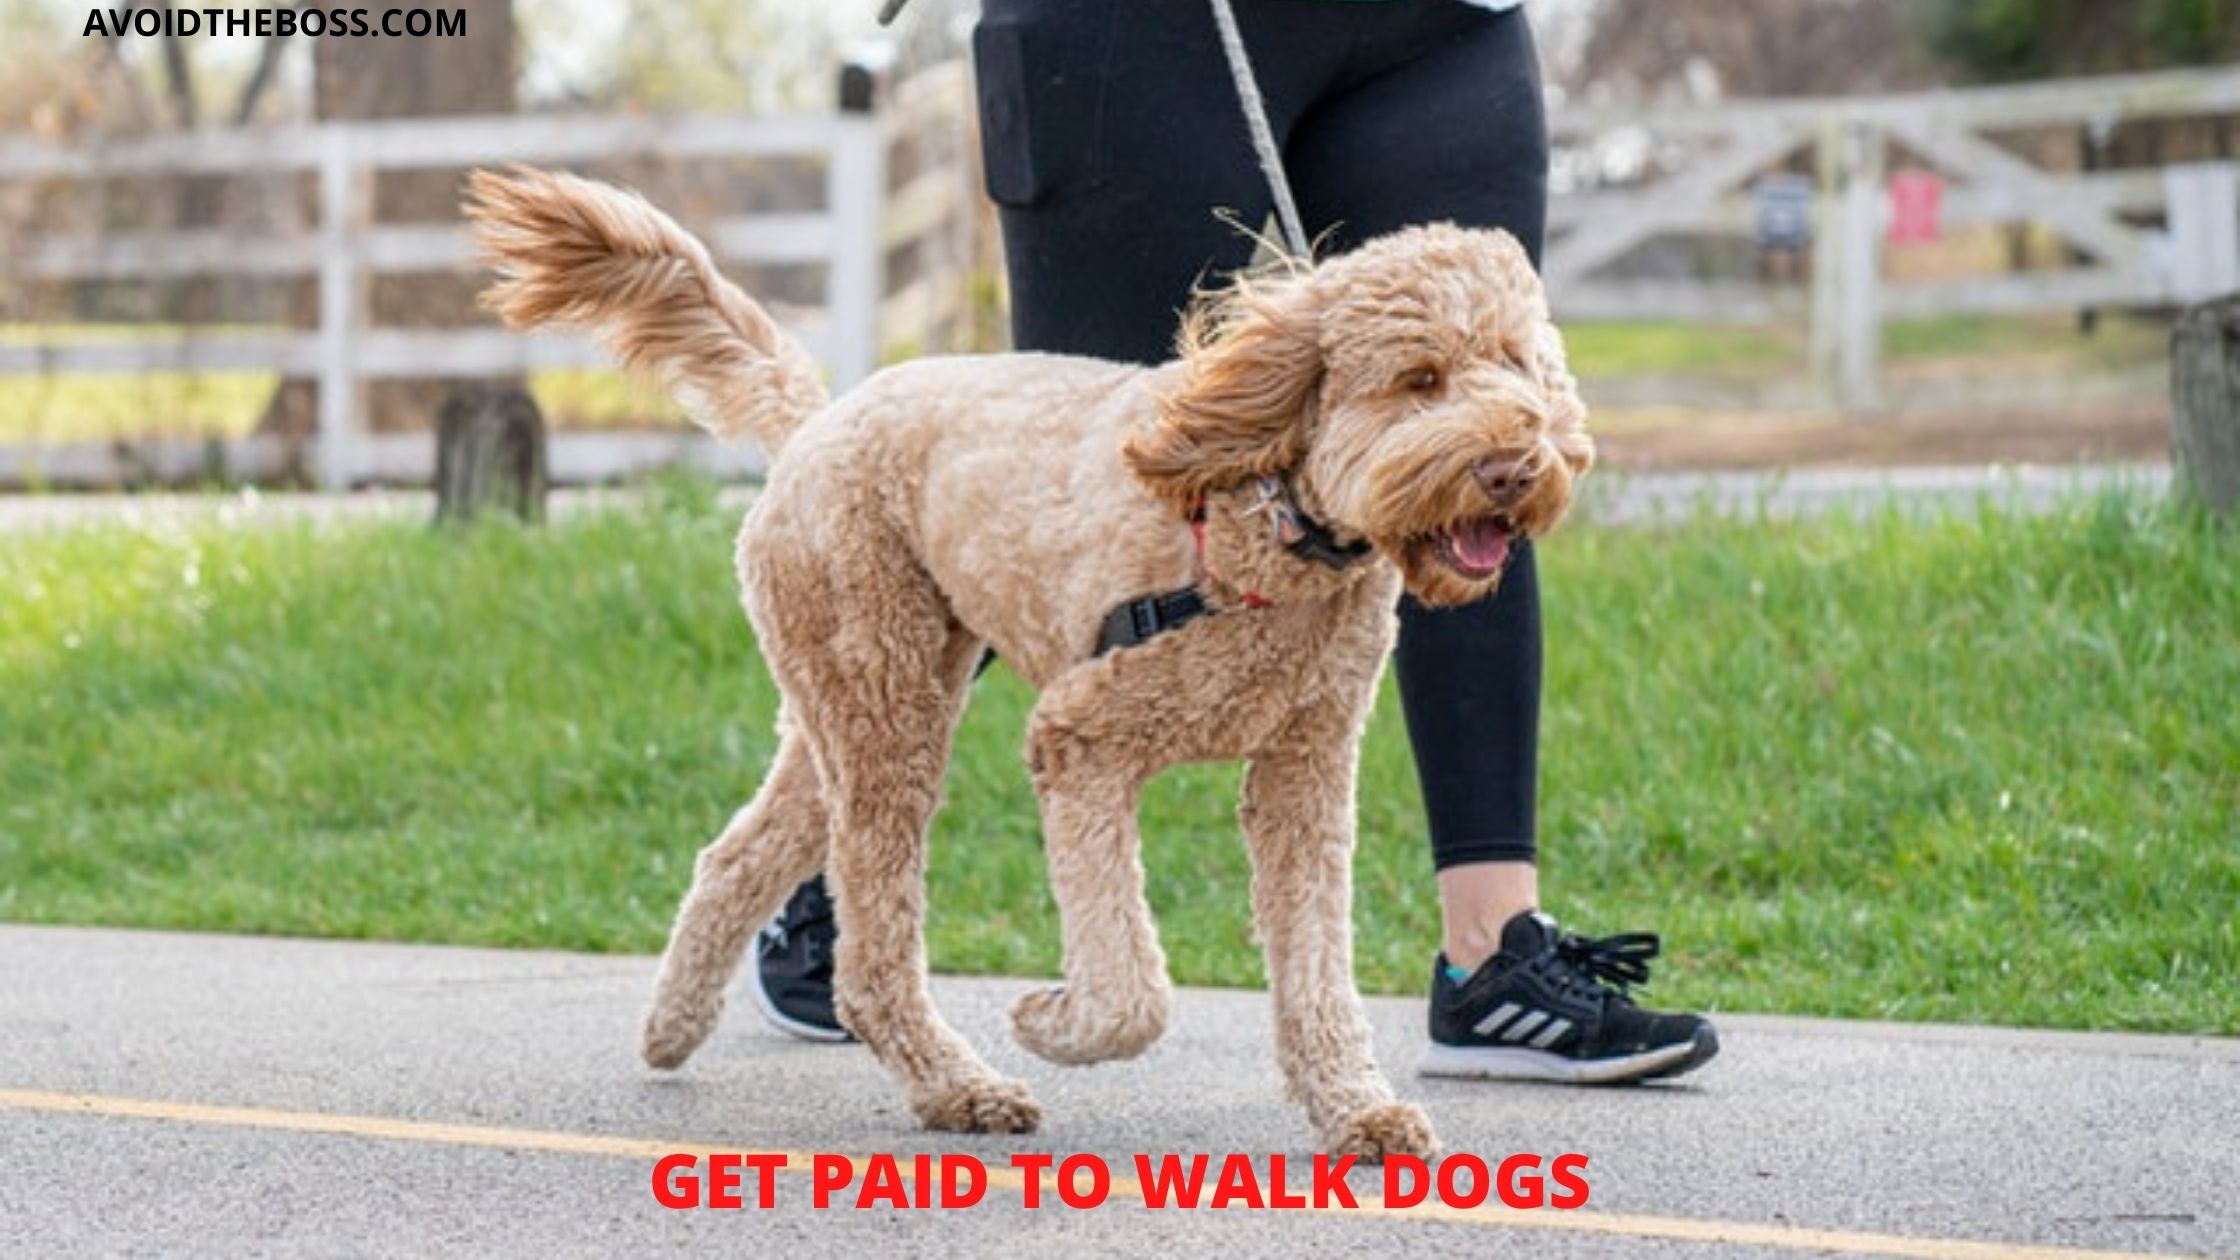 How to make money as a dog walker